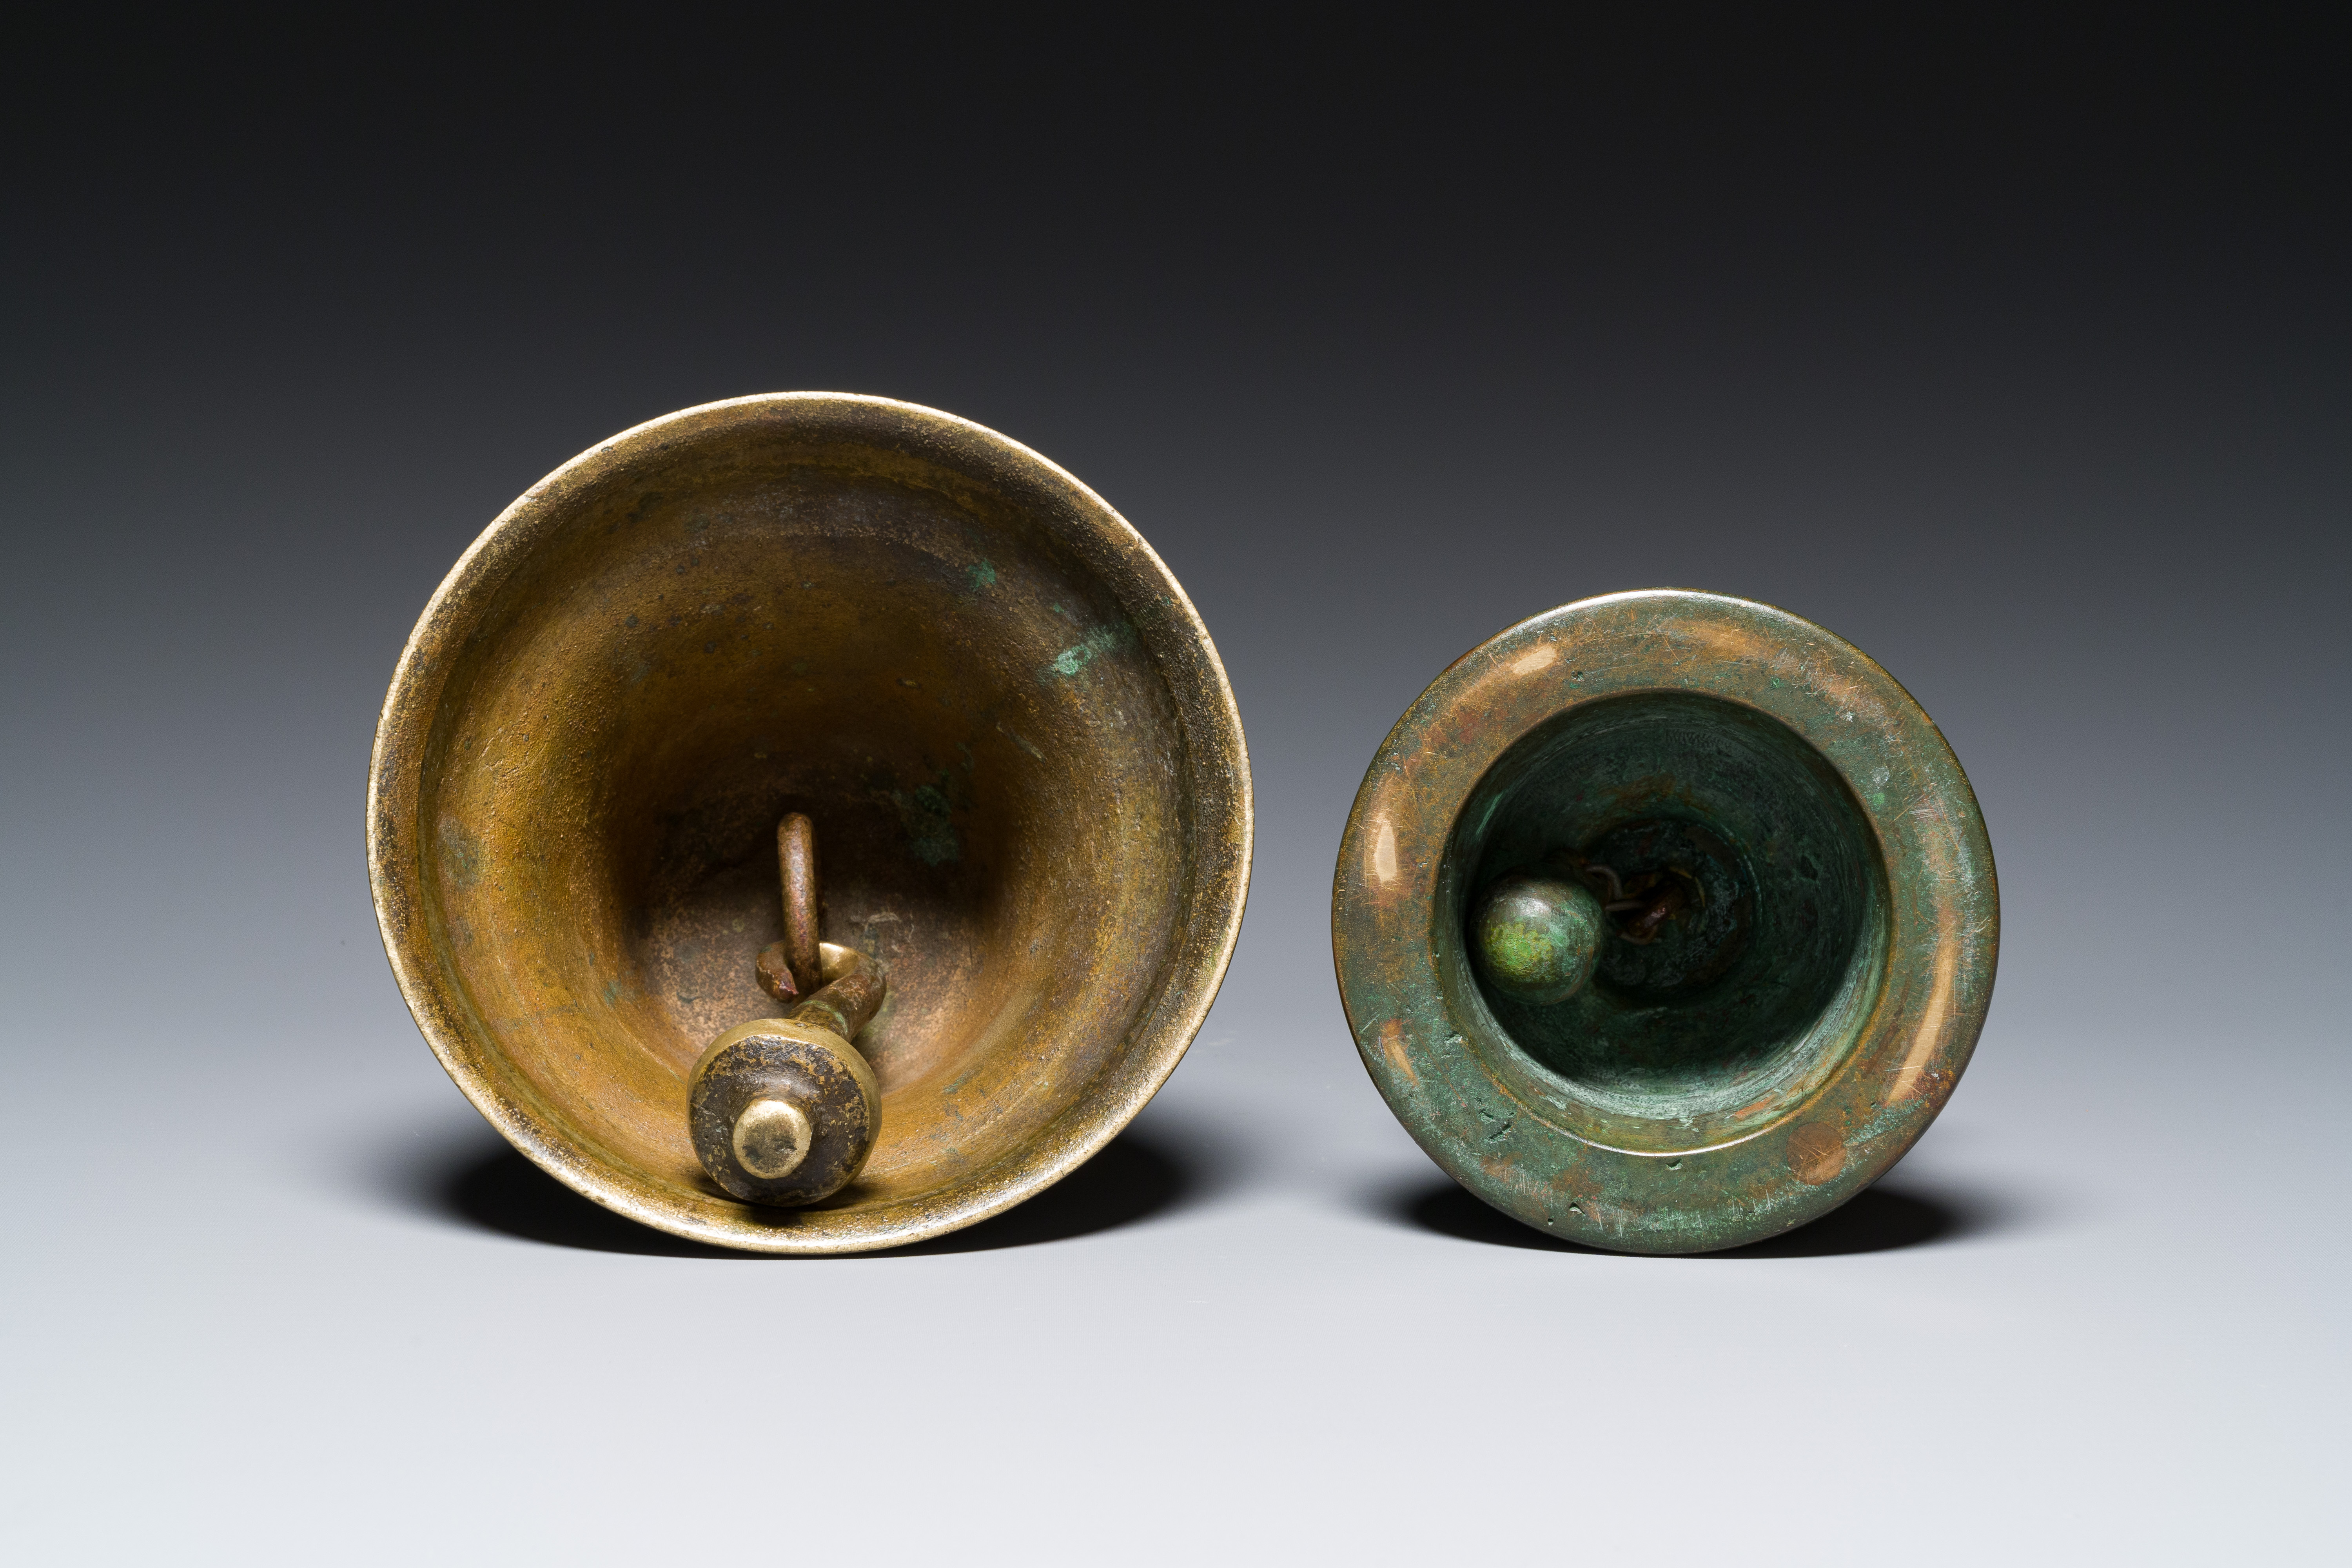 A bronze bell and a ceremonial hand bell, South Asia and Southeast Asia, 19th C. or earlier - Image 19 of 21